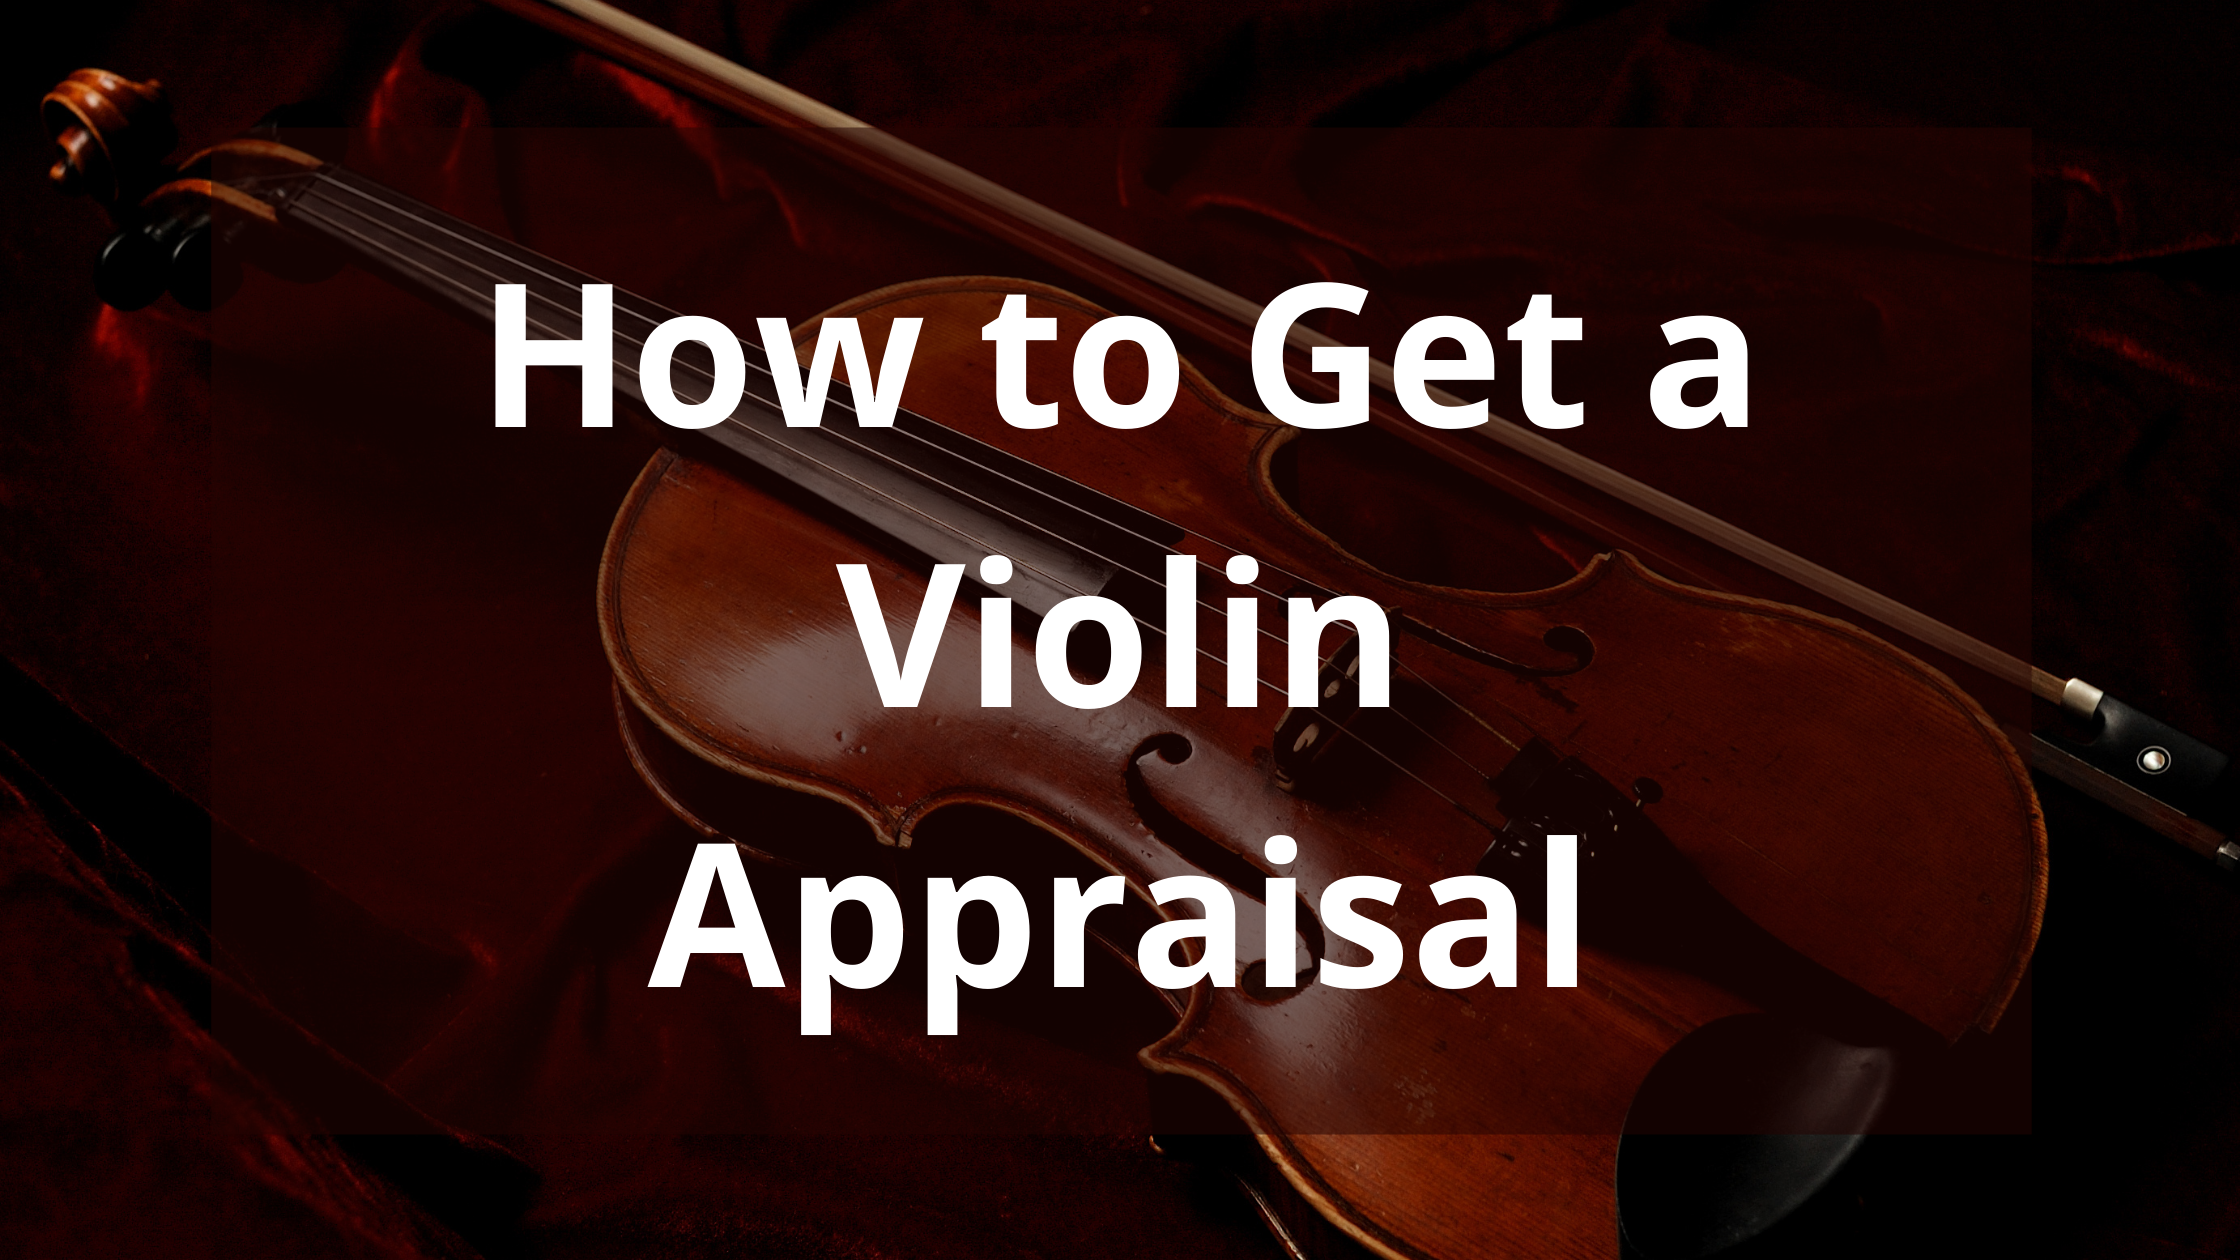 How To Get A Violin Appraisal